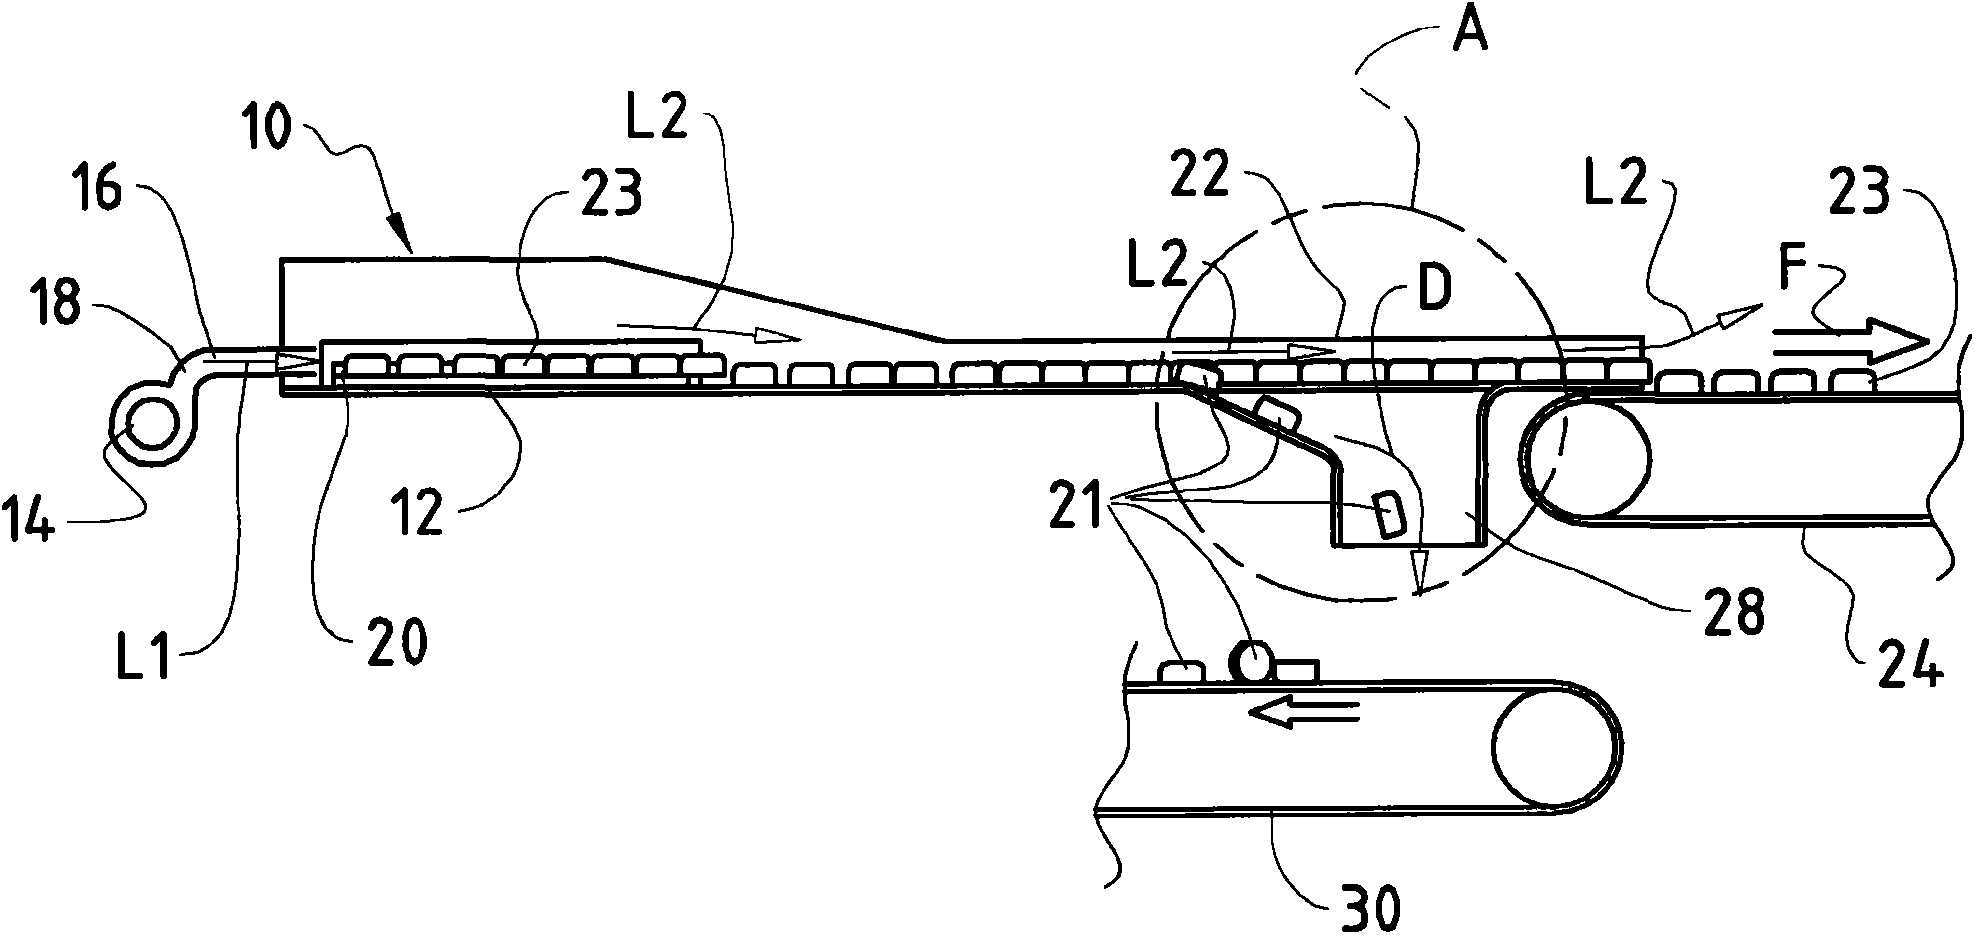 Method and apparatus for aligning screw caps of hollow bodies, especially bottles